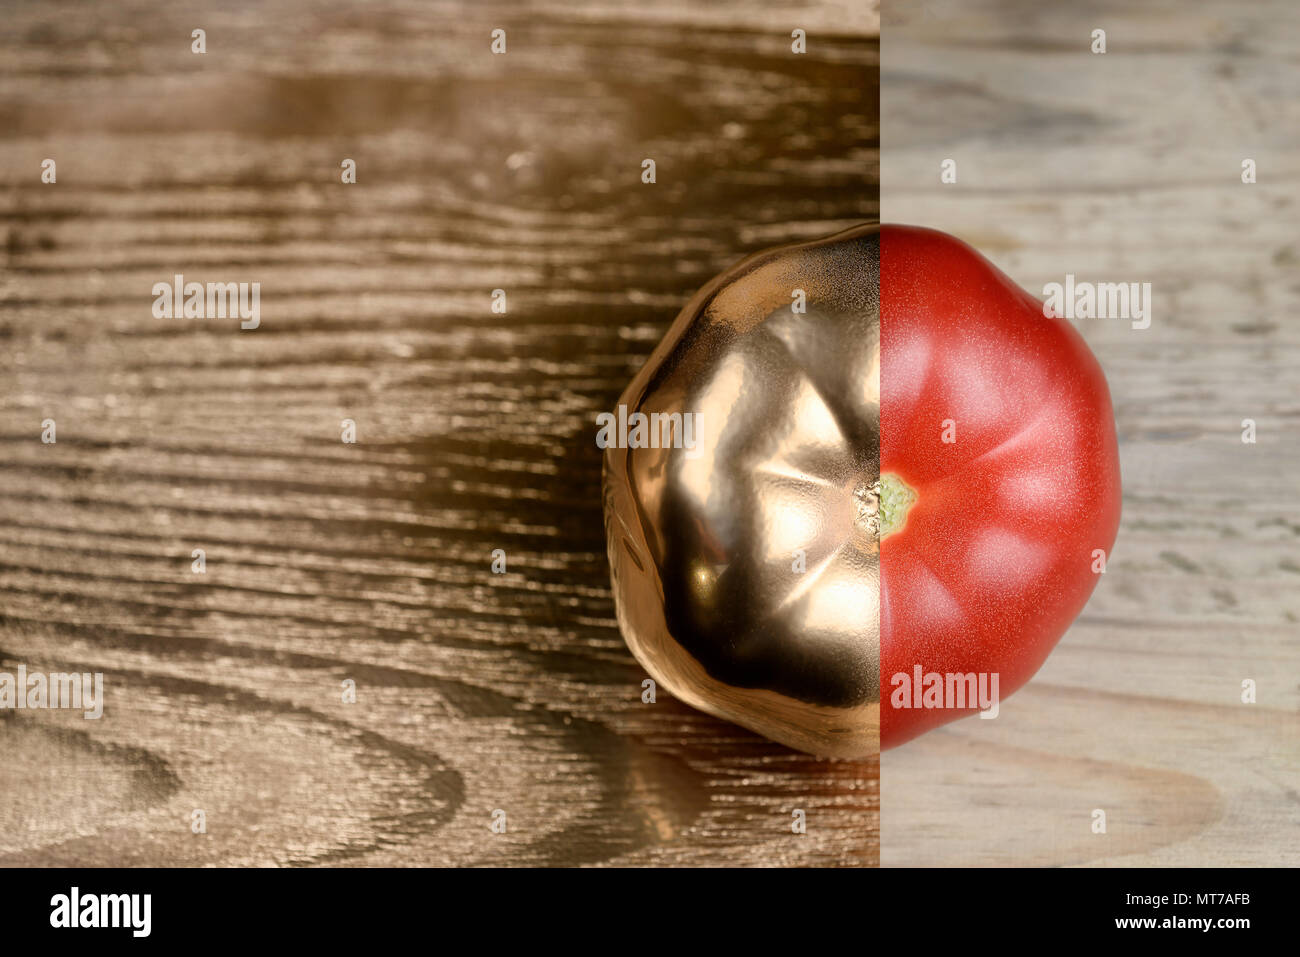 Creative layout made of tomato. Golden paint and natural. Food concept. Stock Photo